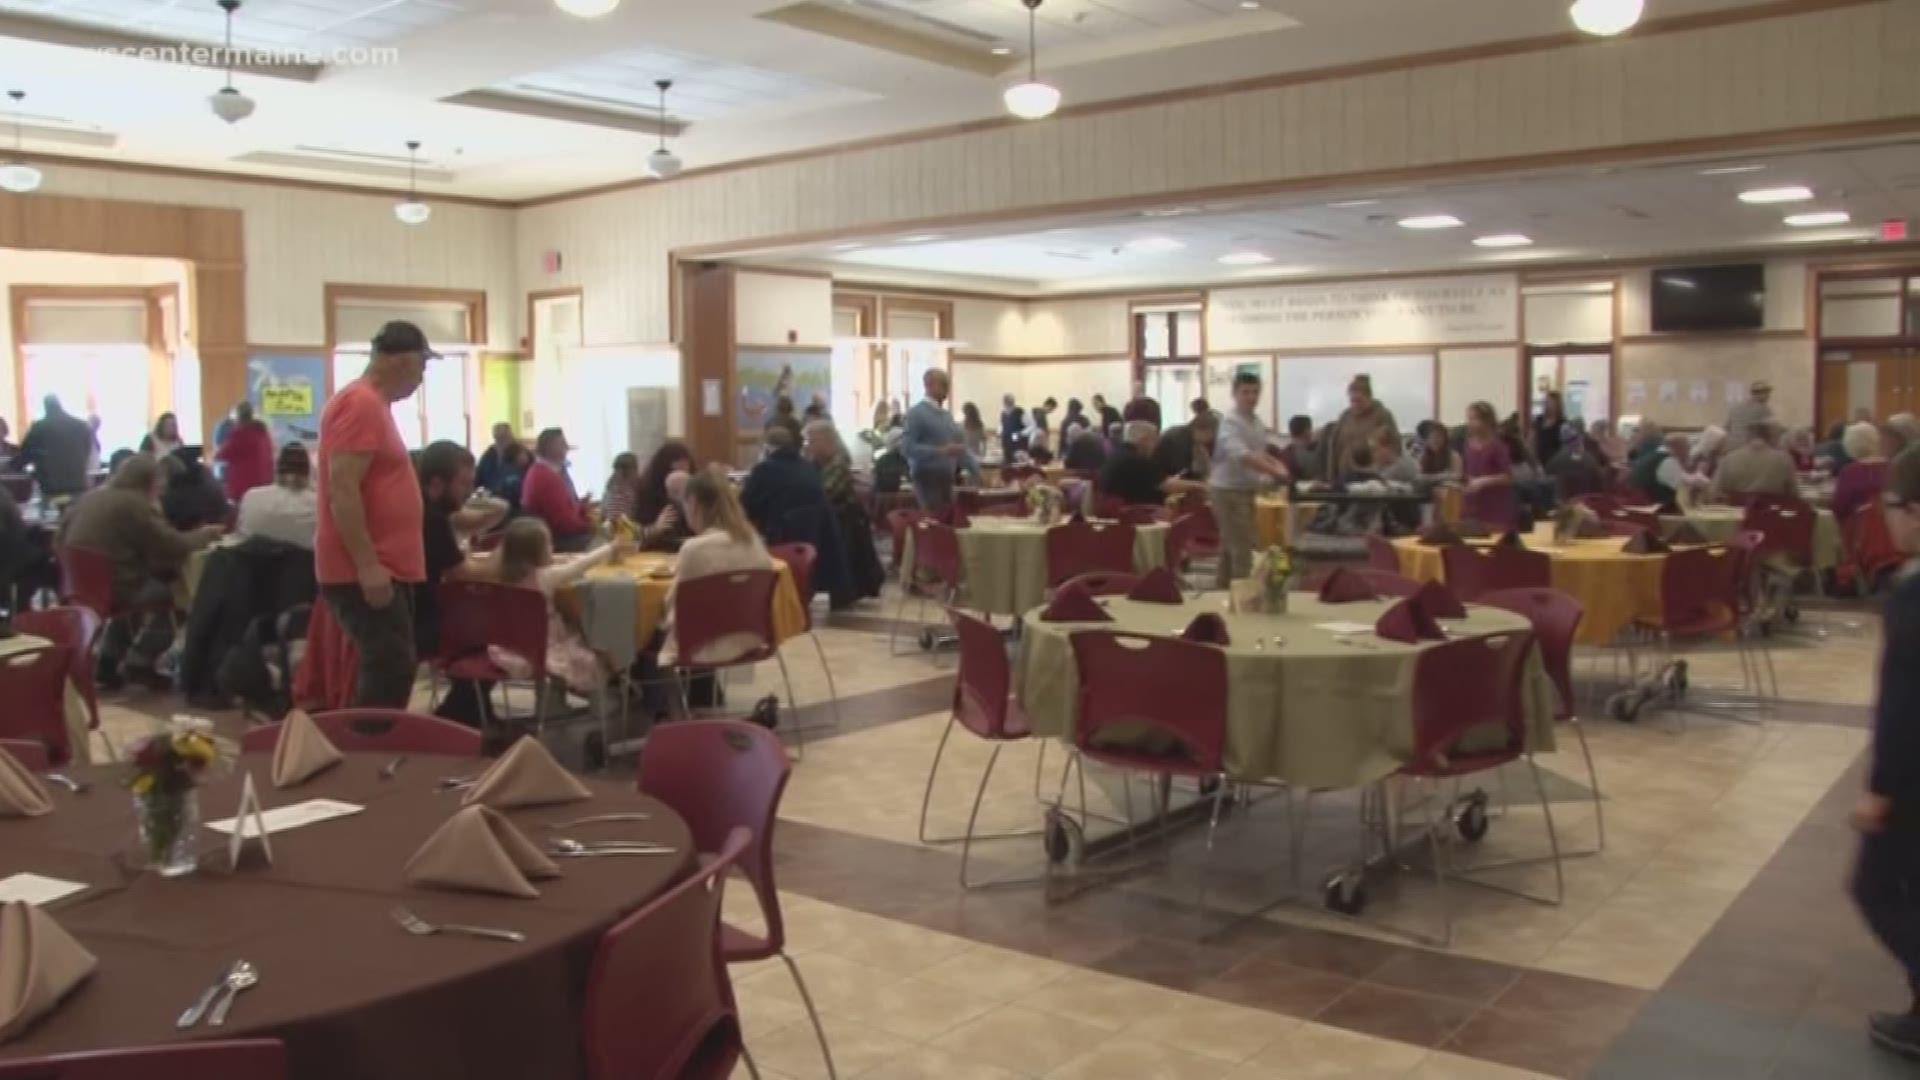 "Thanksgiving Scarborough" welcomed people for a free meal